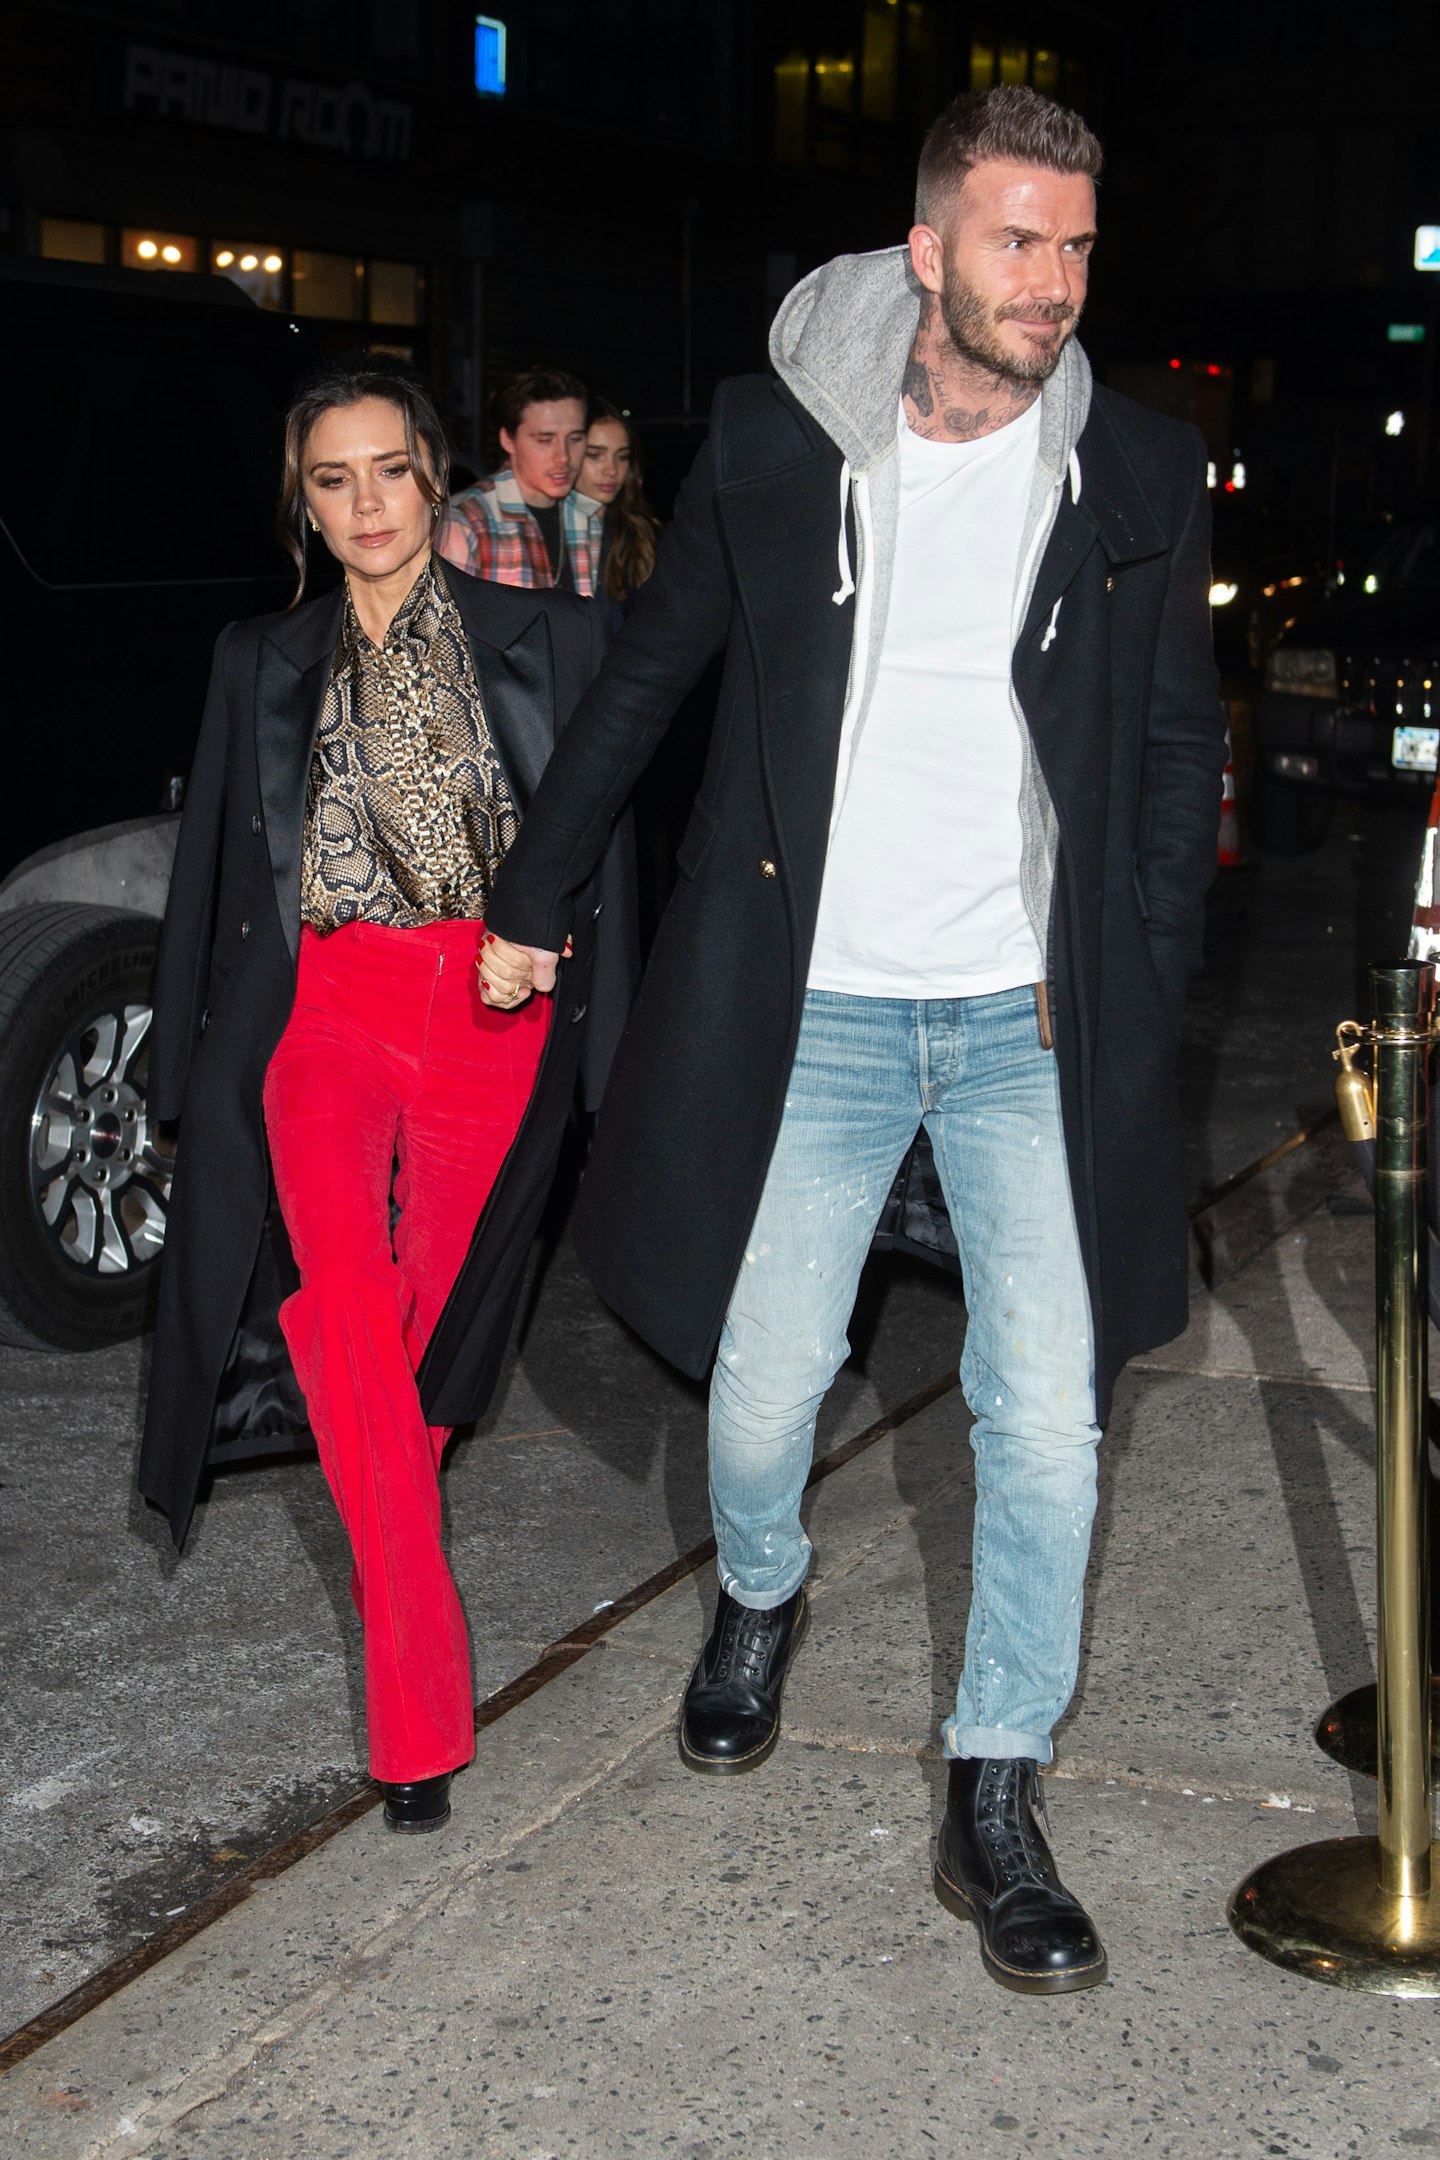 Victoria Beckham and David Beckham are seen on January 22, 2019 in New York City.